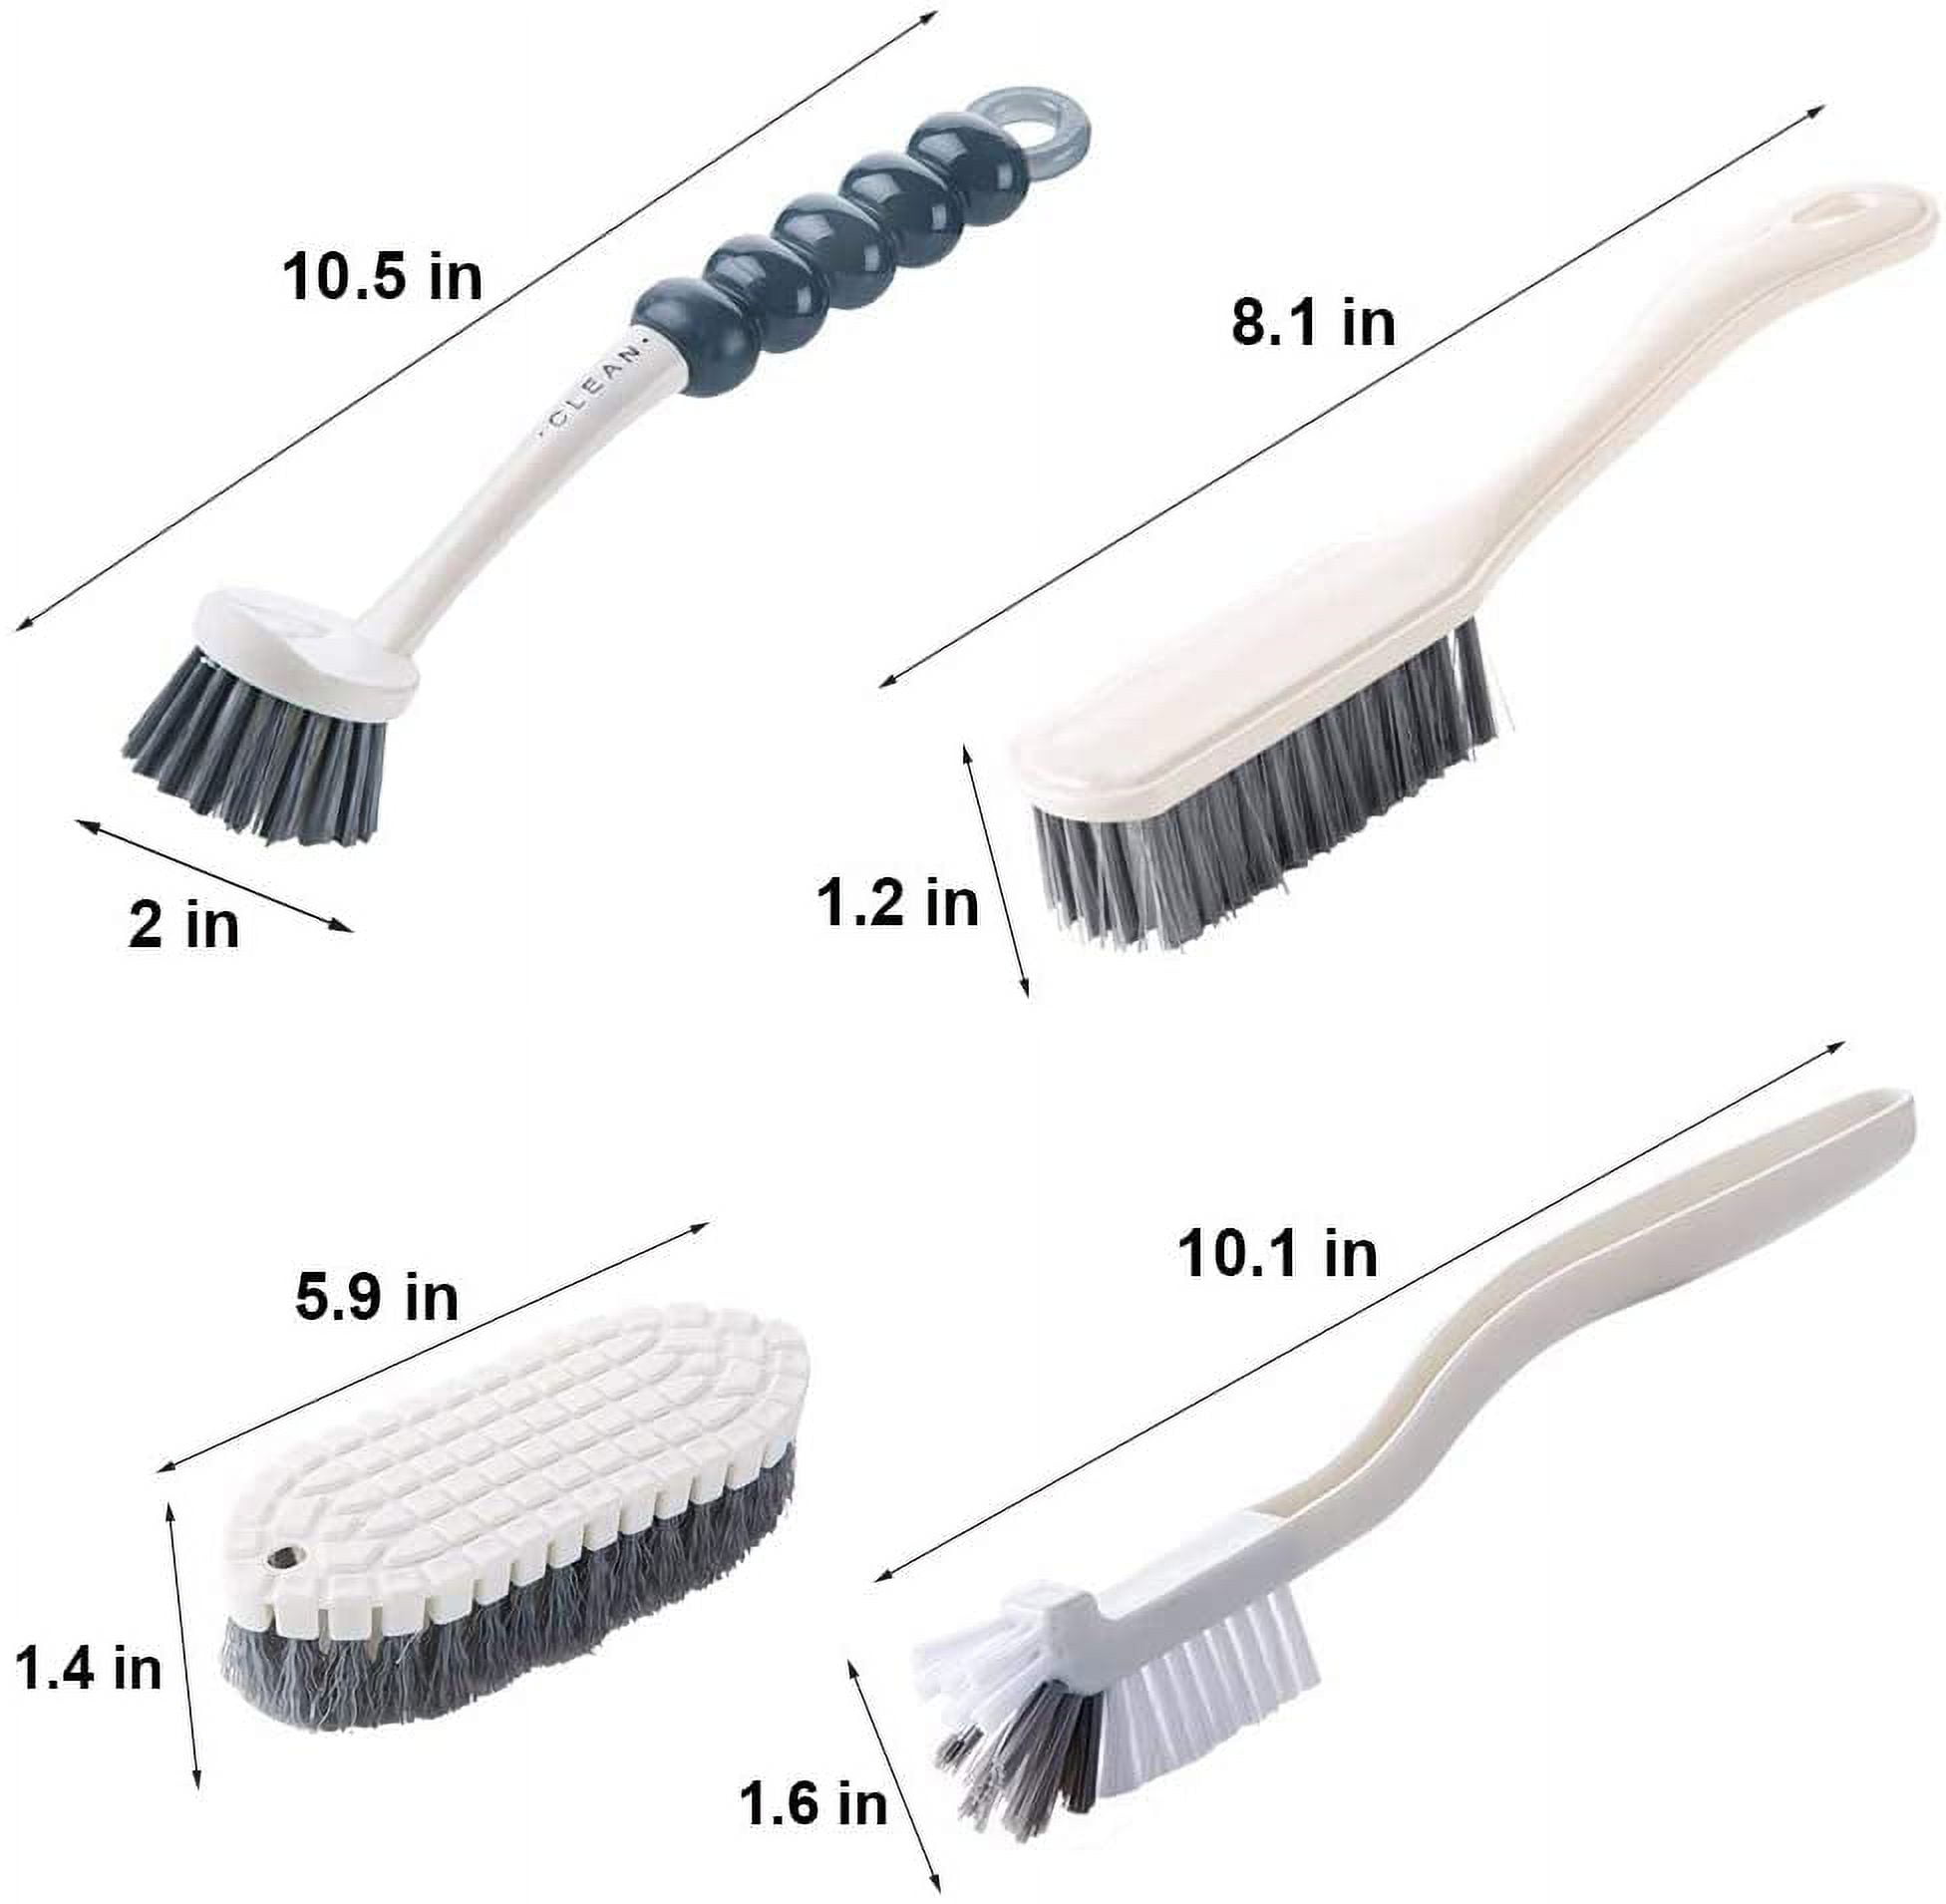 Cleaning Brush Small(1X144)